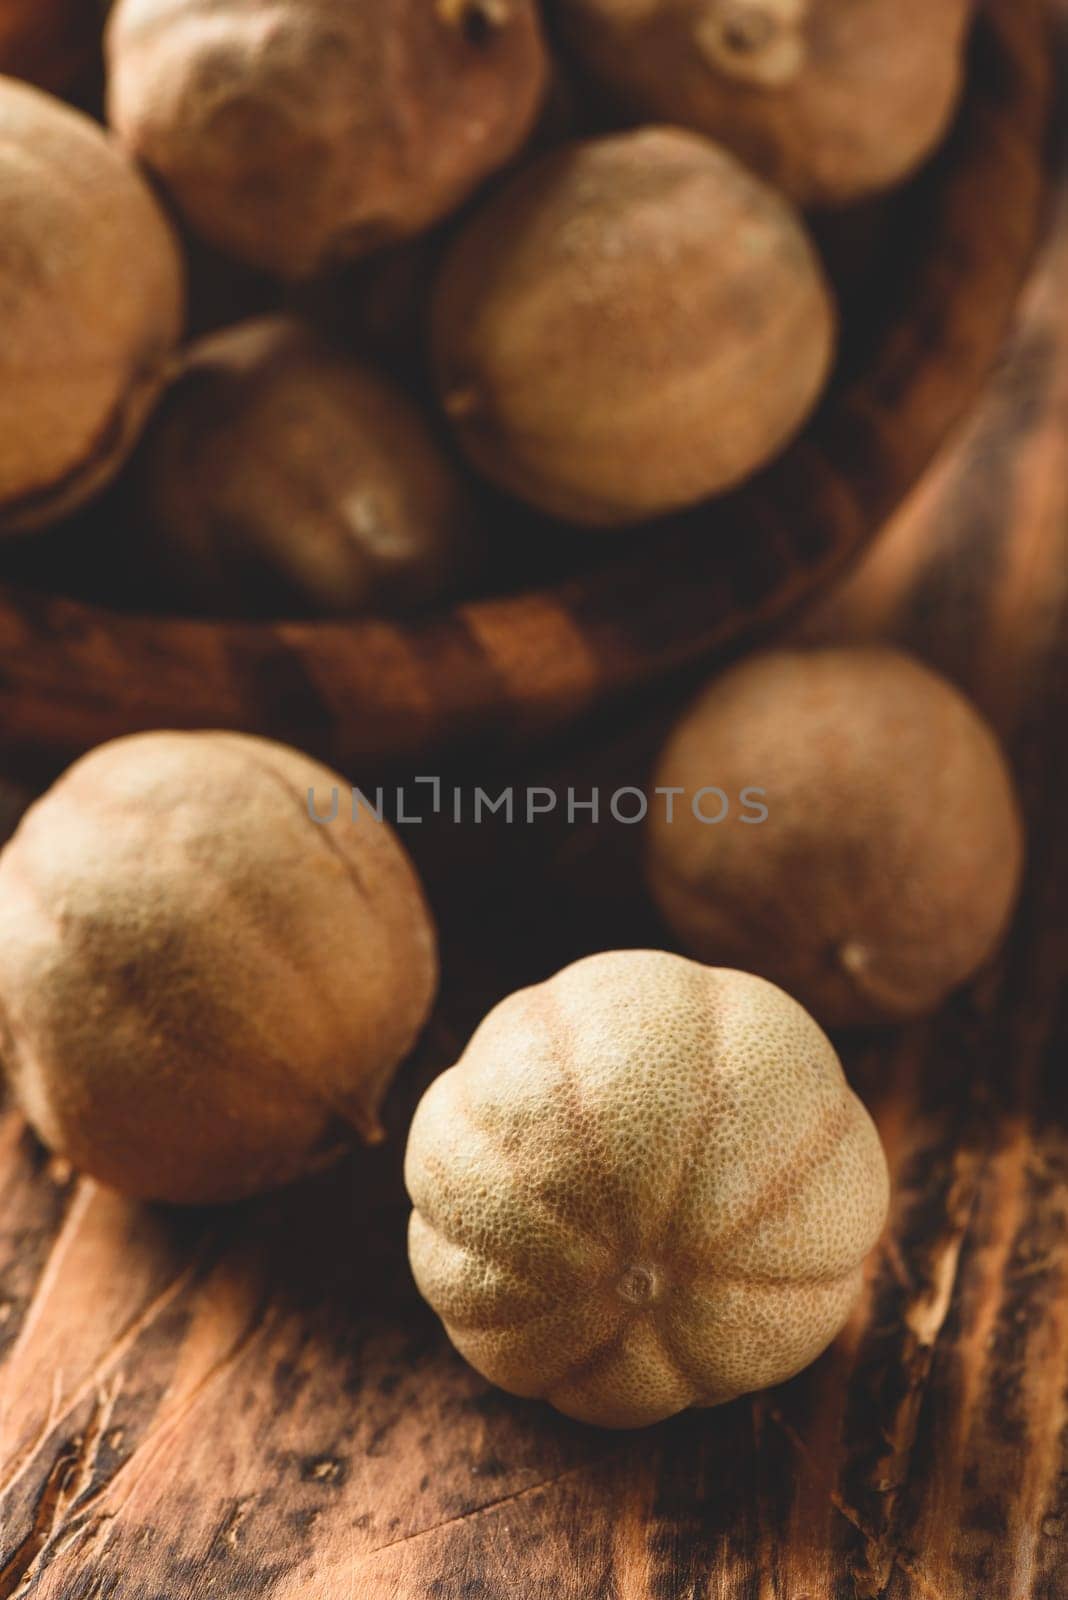 Sun dried limes in rustic wooden bowl